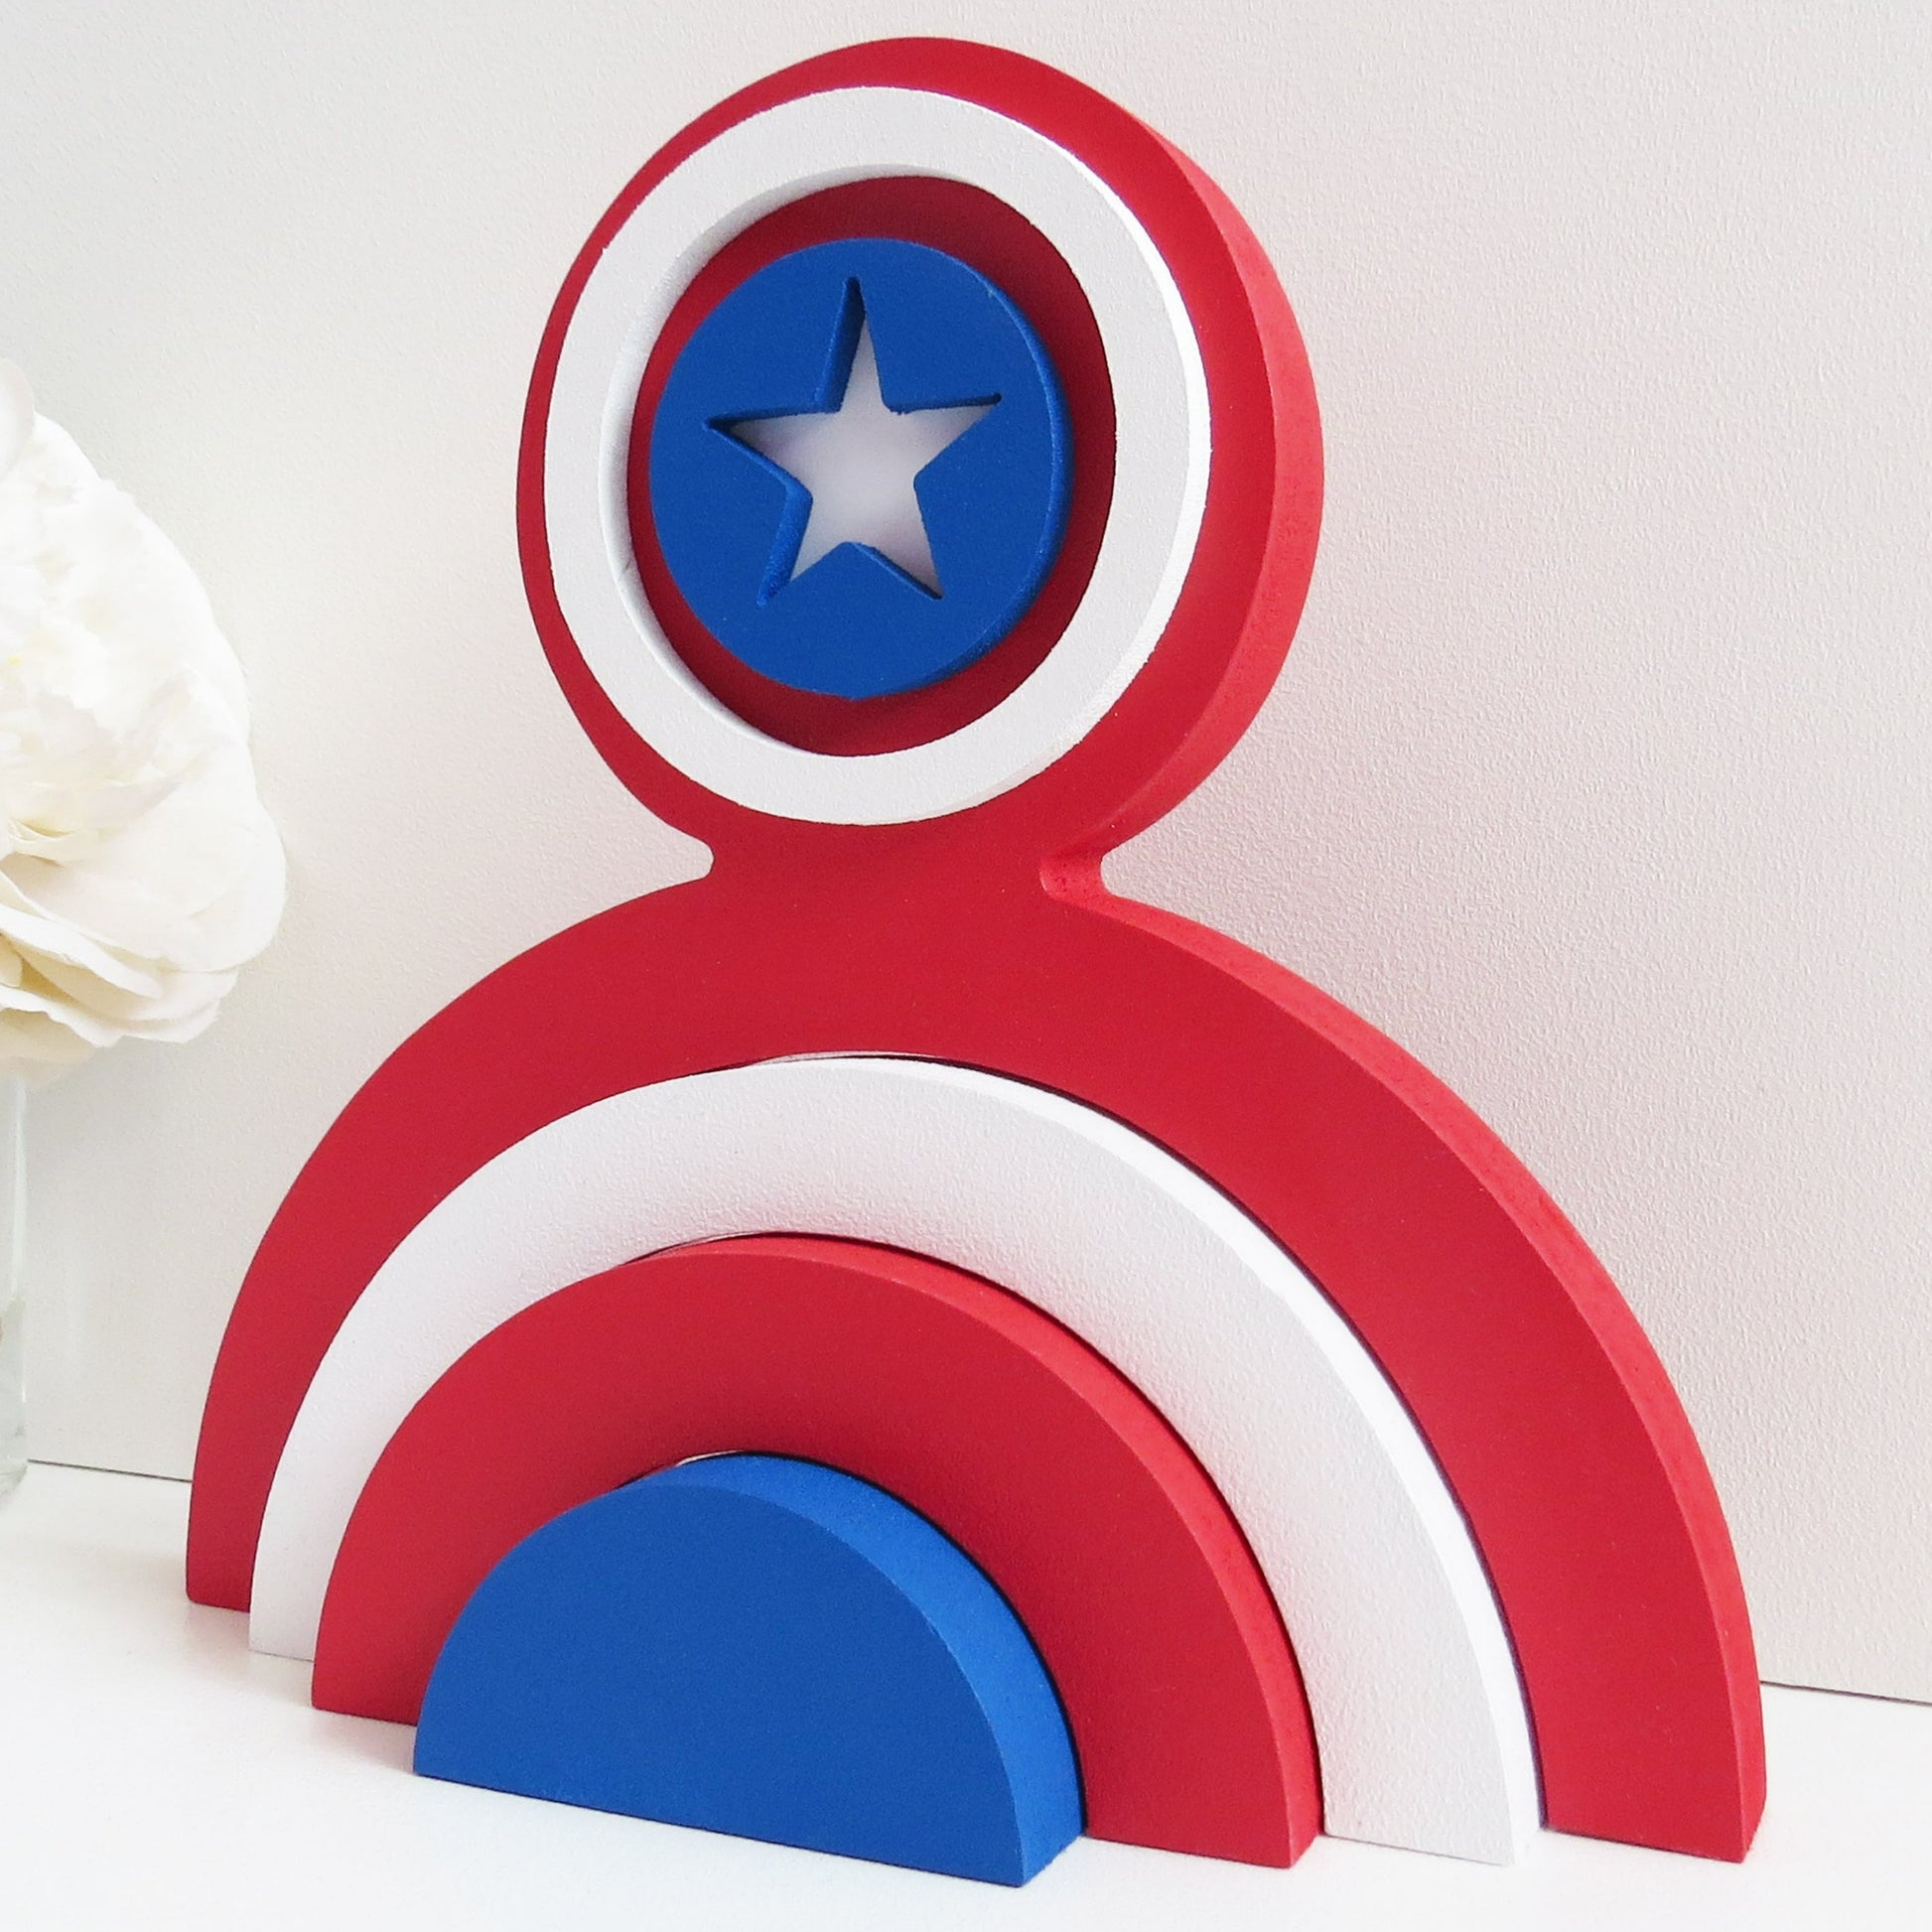 Captain America Rainbow Stacker for a childrens nursery or bedroom.